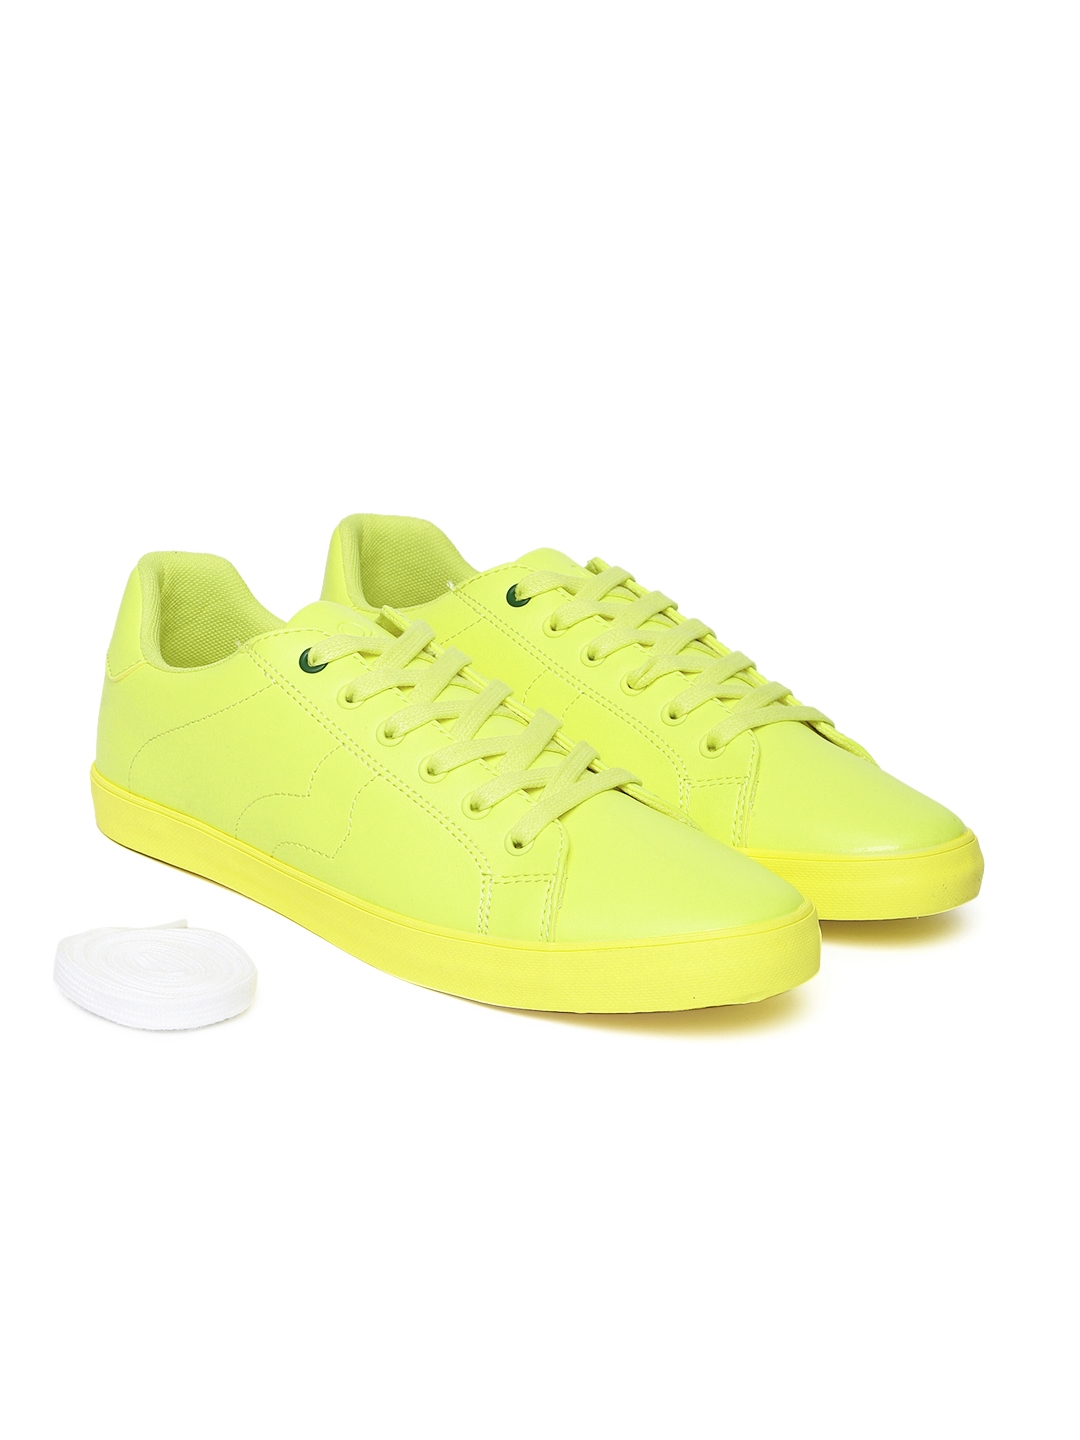 united colors of benetton green sneakers